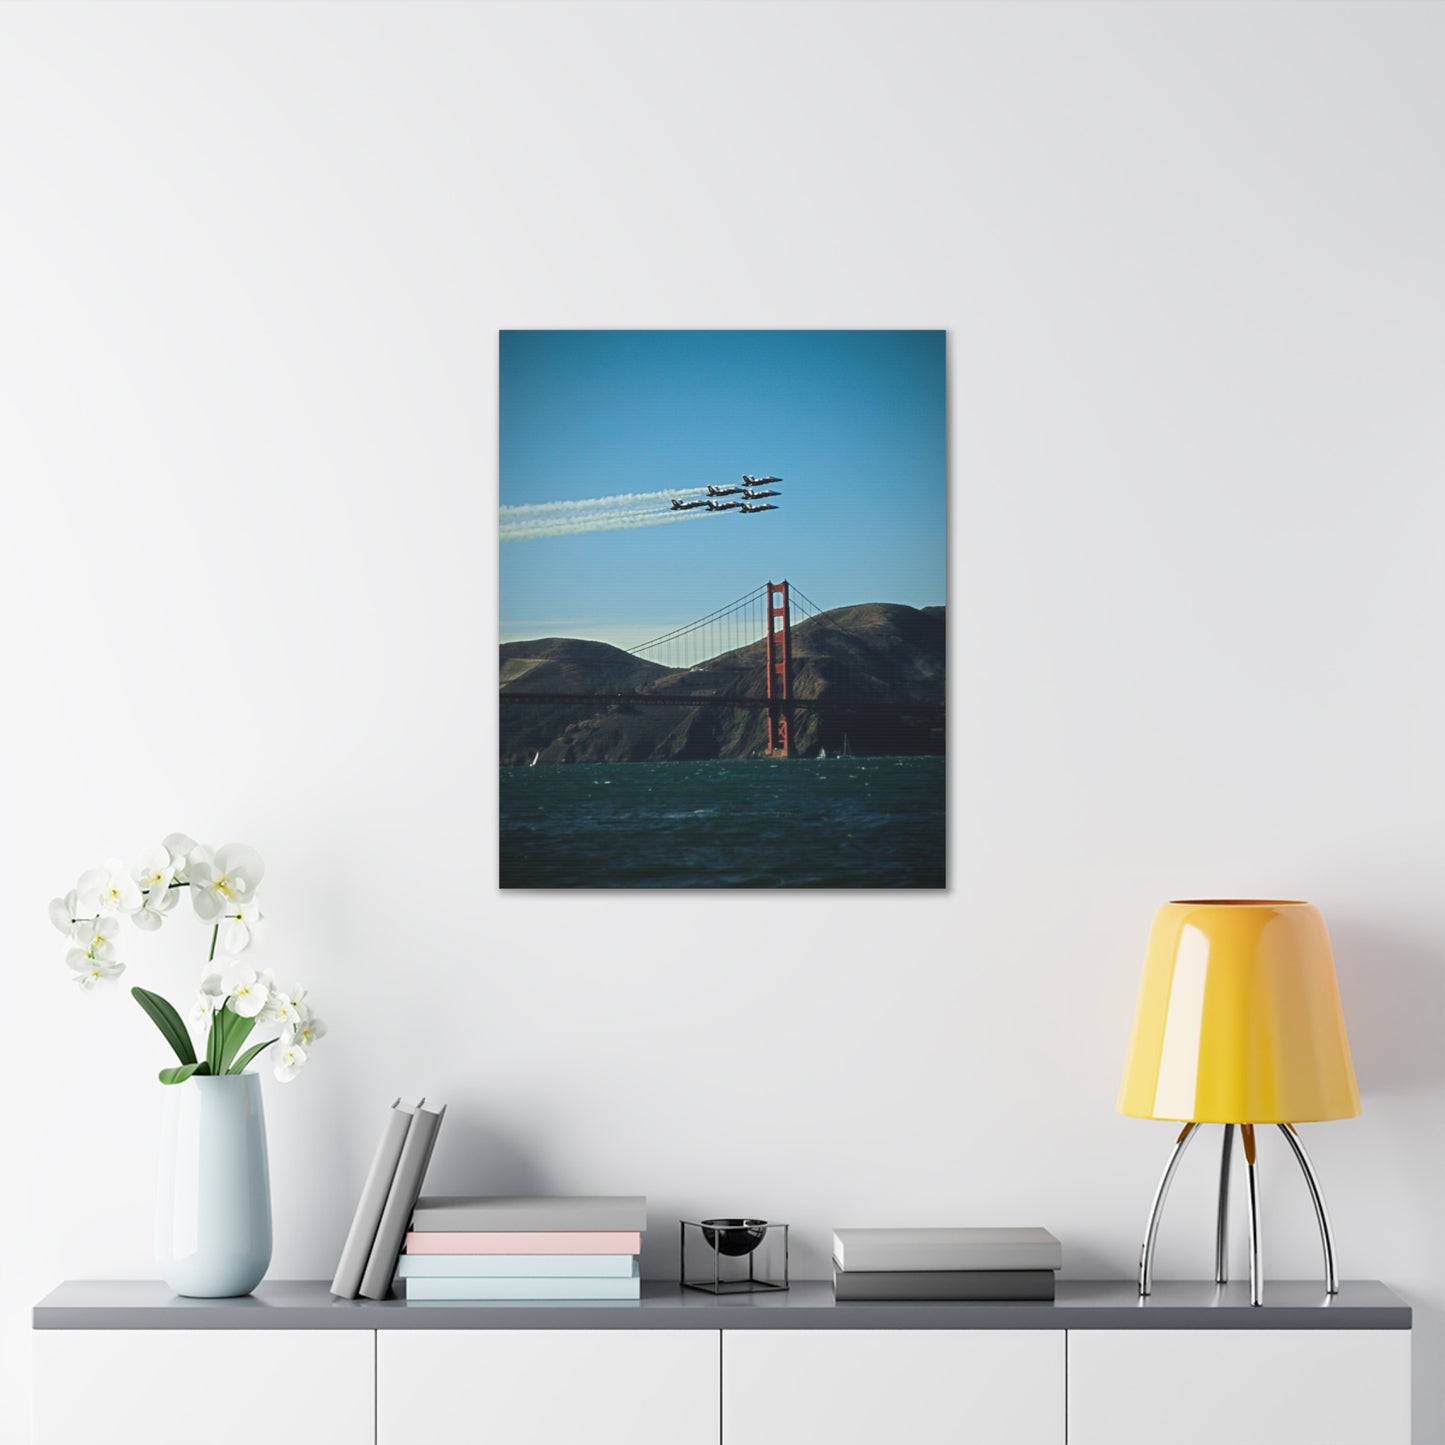 Canvas Print Of Blue Angels And Golden Gate Bridge In San Francisco For Wall Art